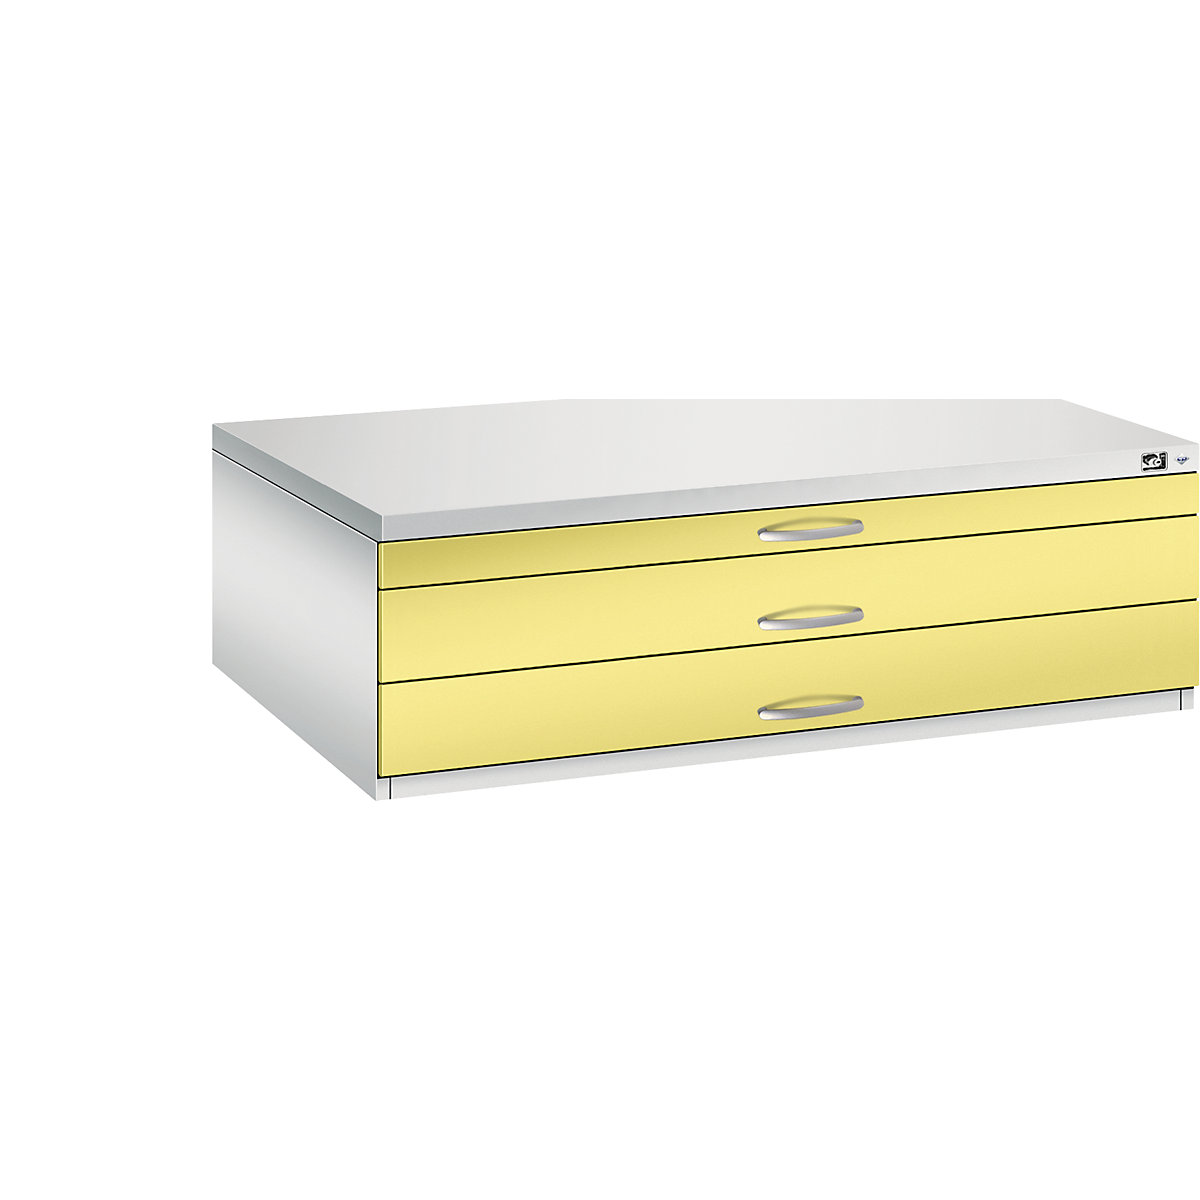 Drawing cabinet – C+P, A0, 3 drawers, height 420 mm, light grey / sulphur yellow-20